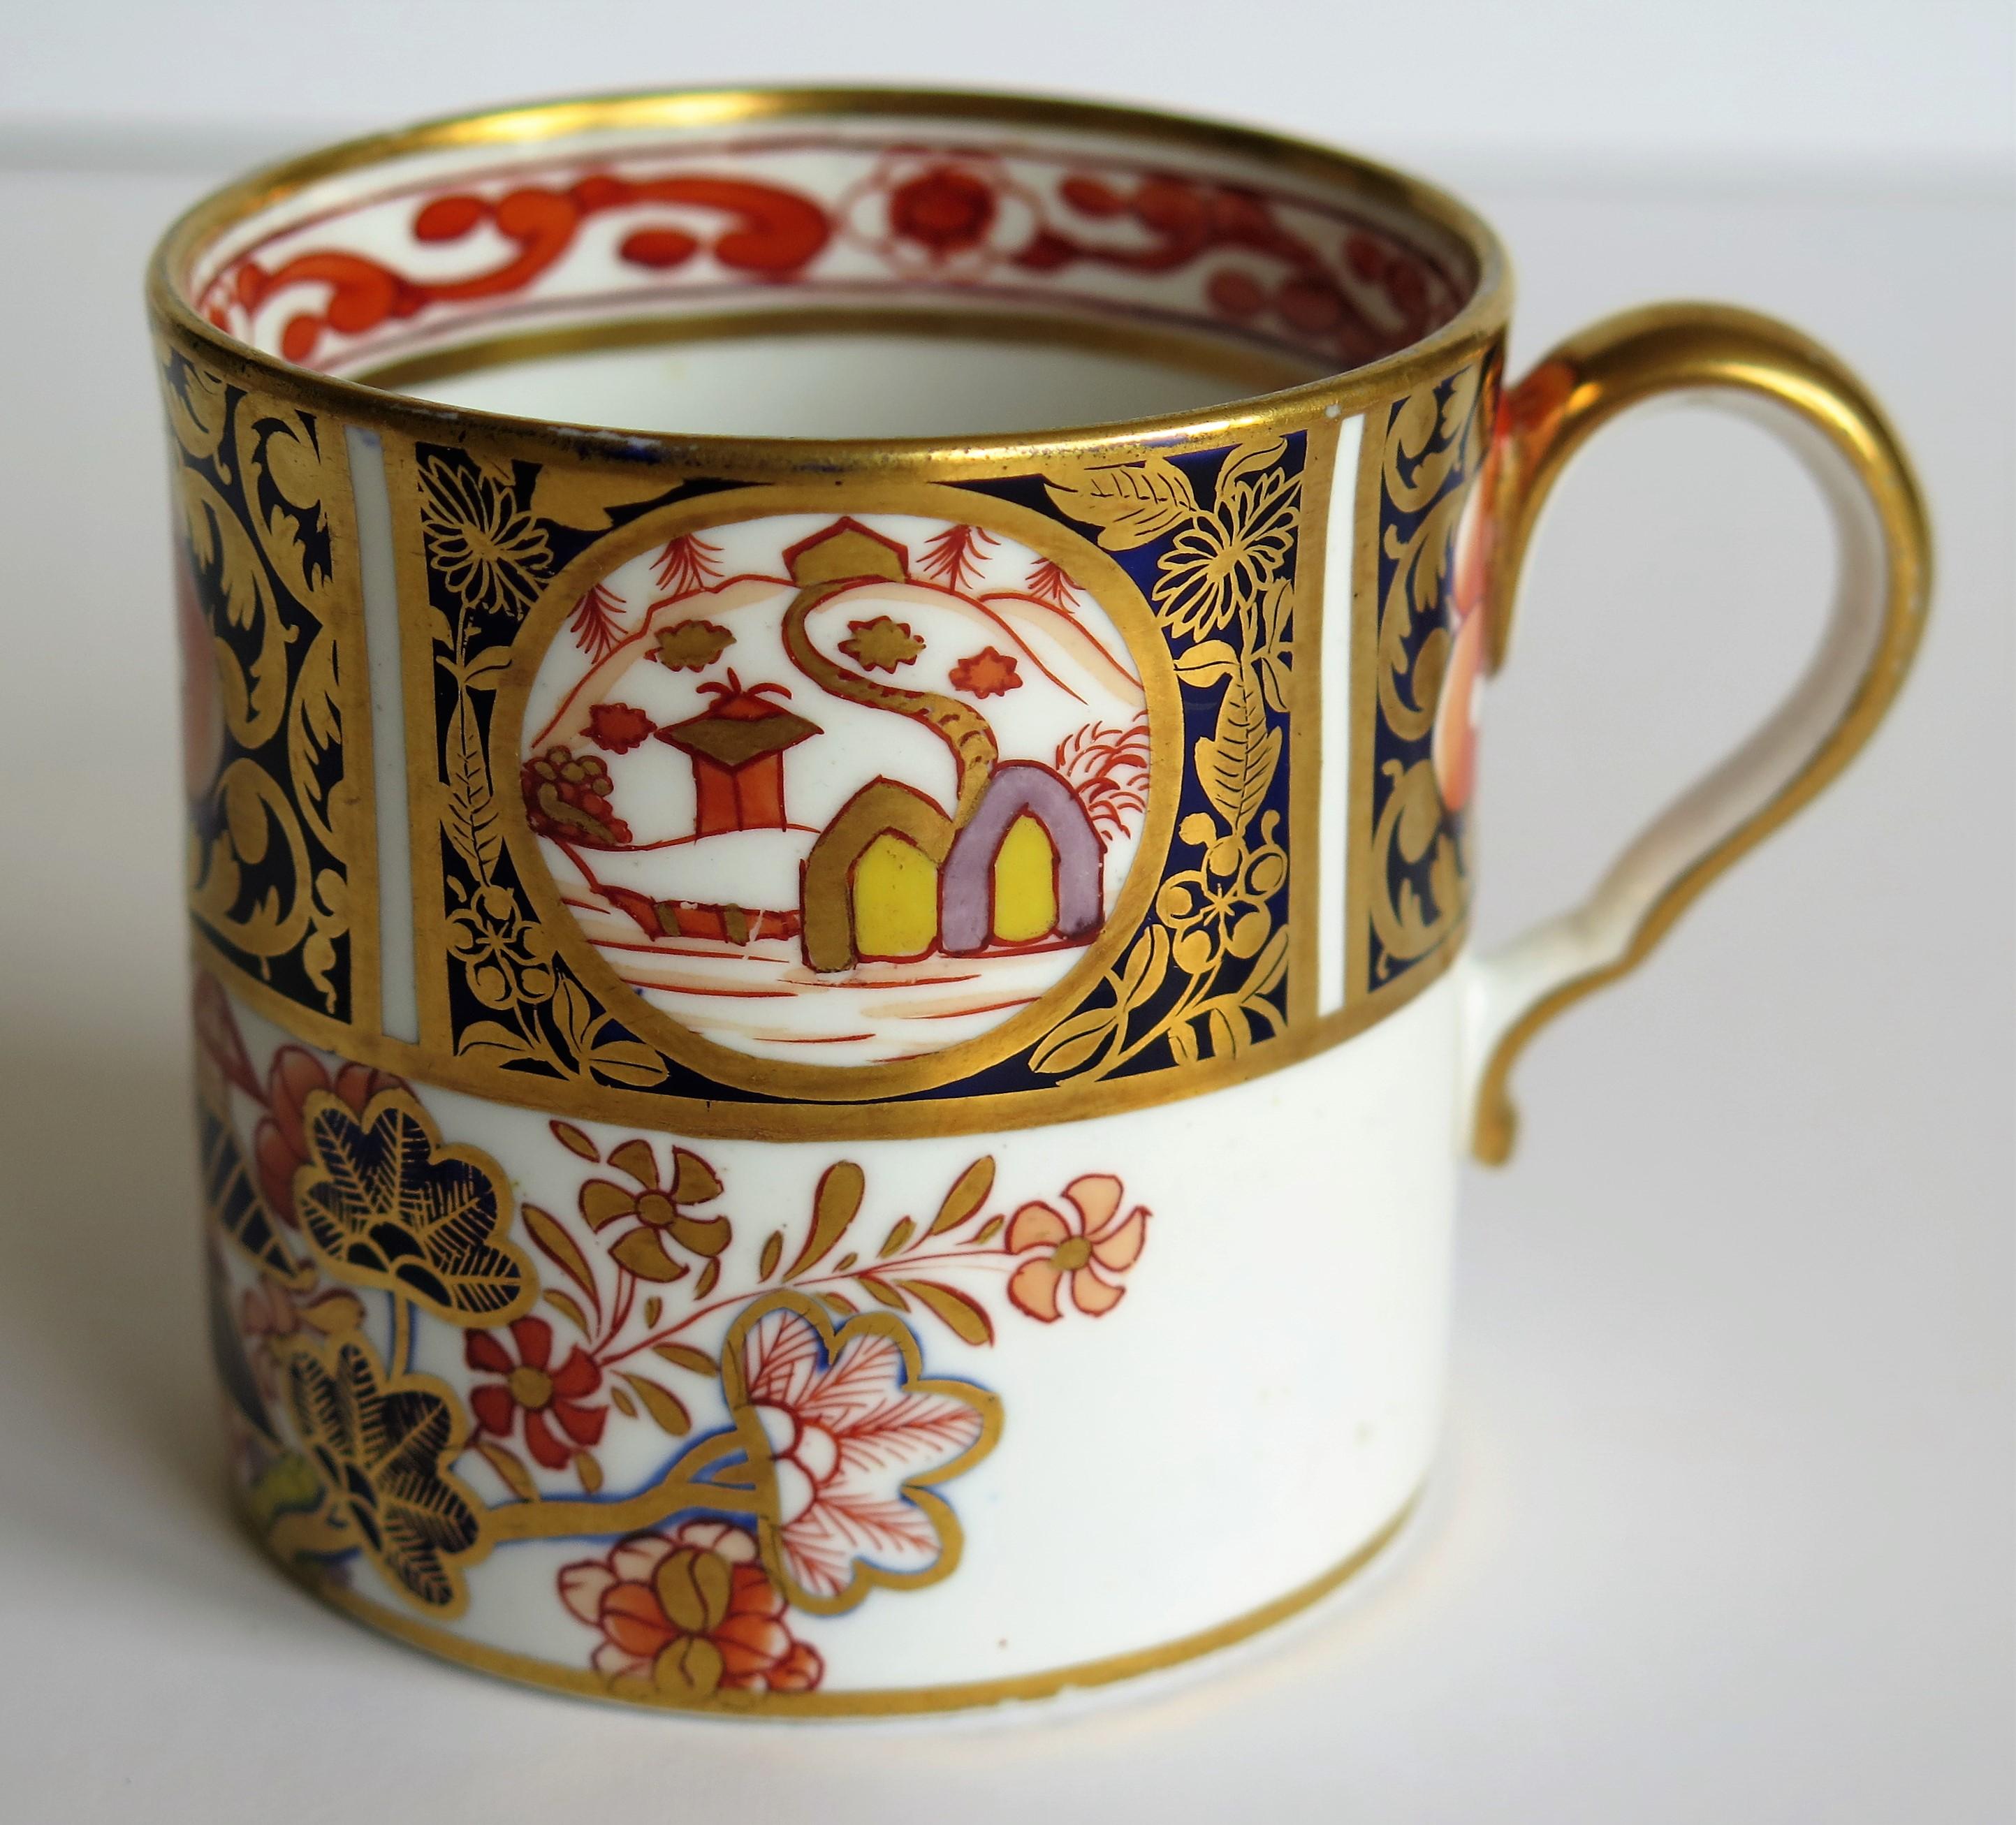 This is a fine example of an English George III period, Spode porcelain, coffee can, hand painted in pattern 1956 and dating from the early 19th century, circa 1810.

The coffee can or cup is nominally straight sided and has the Spode loop handle